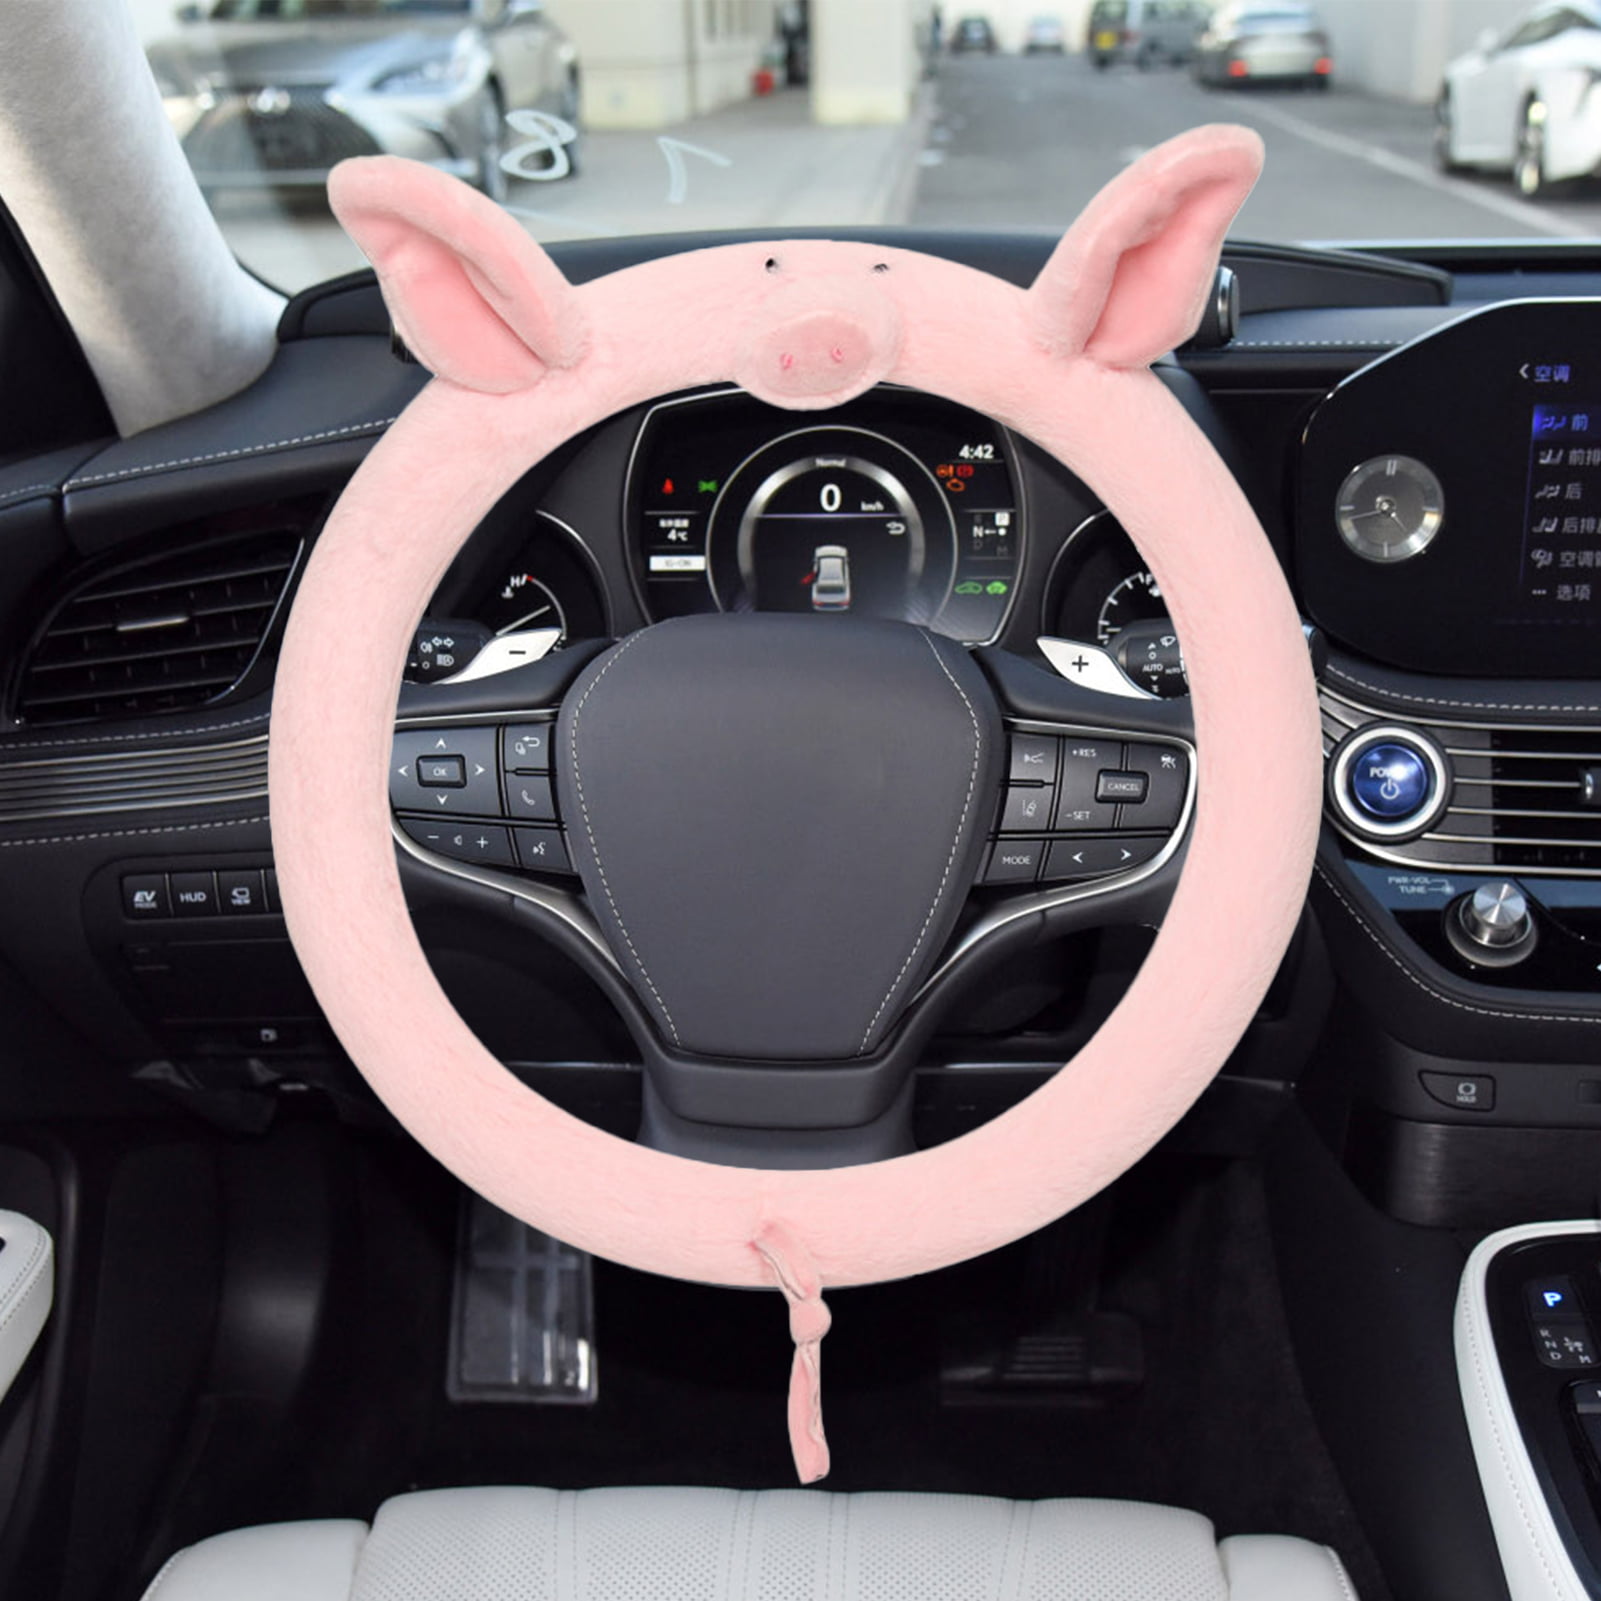 Upetstory Universal Car Vehicle Steering Wheel Cover Cute Ferrets Design Car Wheel Protector Compatible with 35cm-46cm Steering Wheel Green 